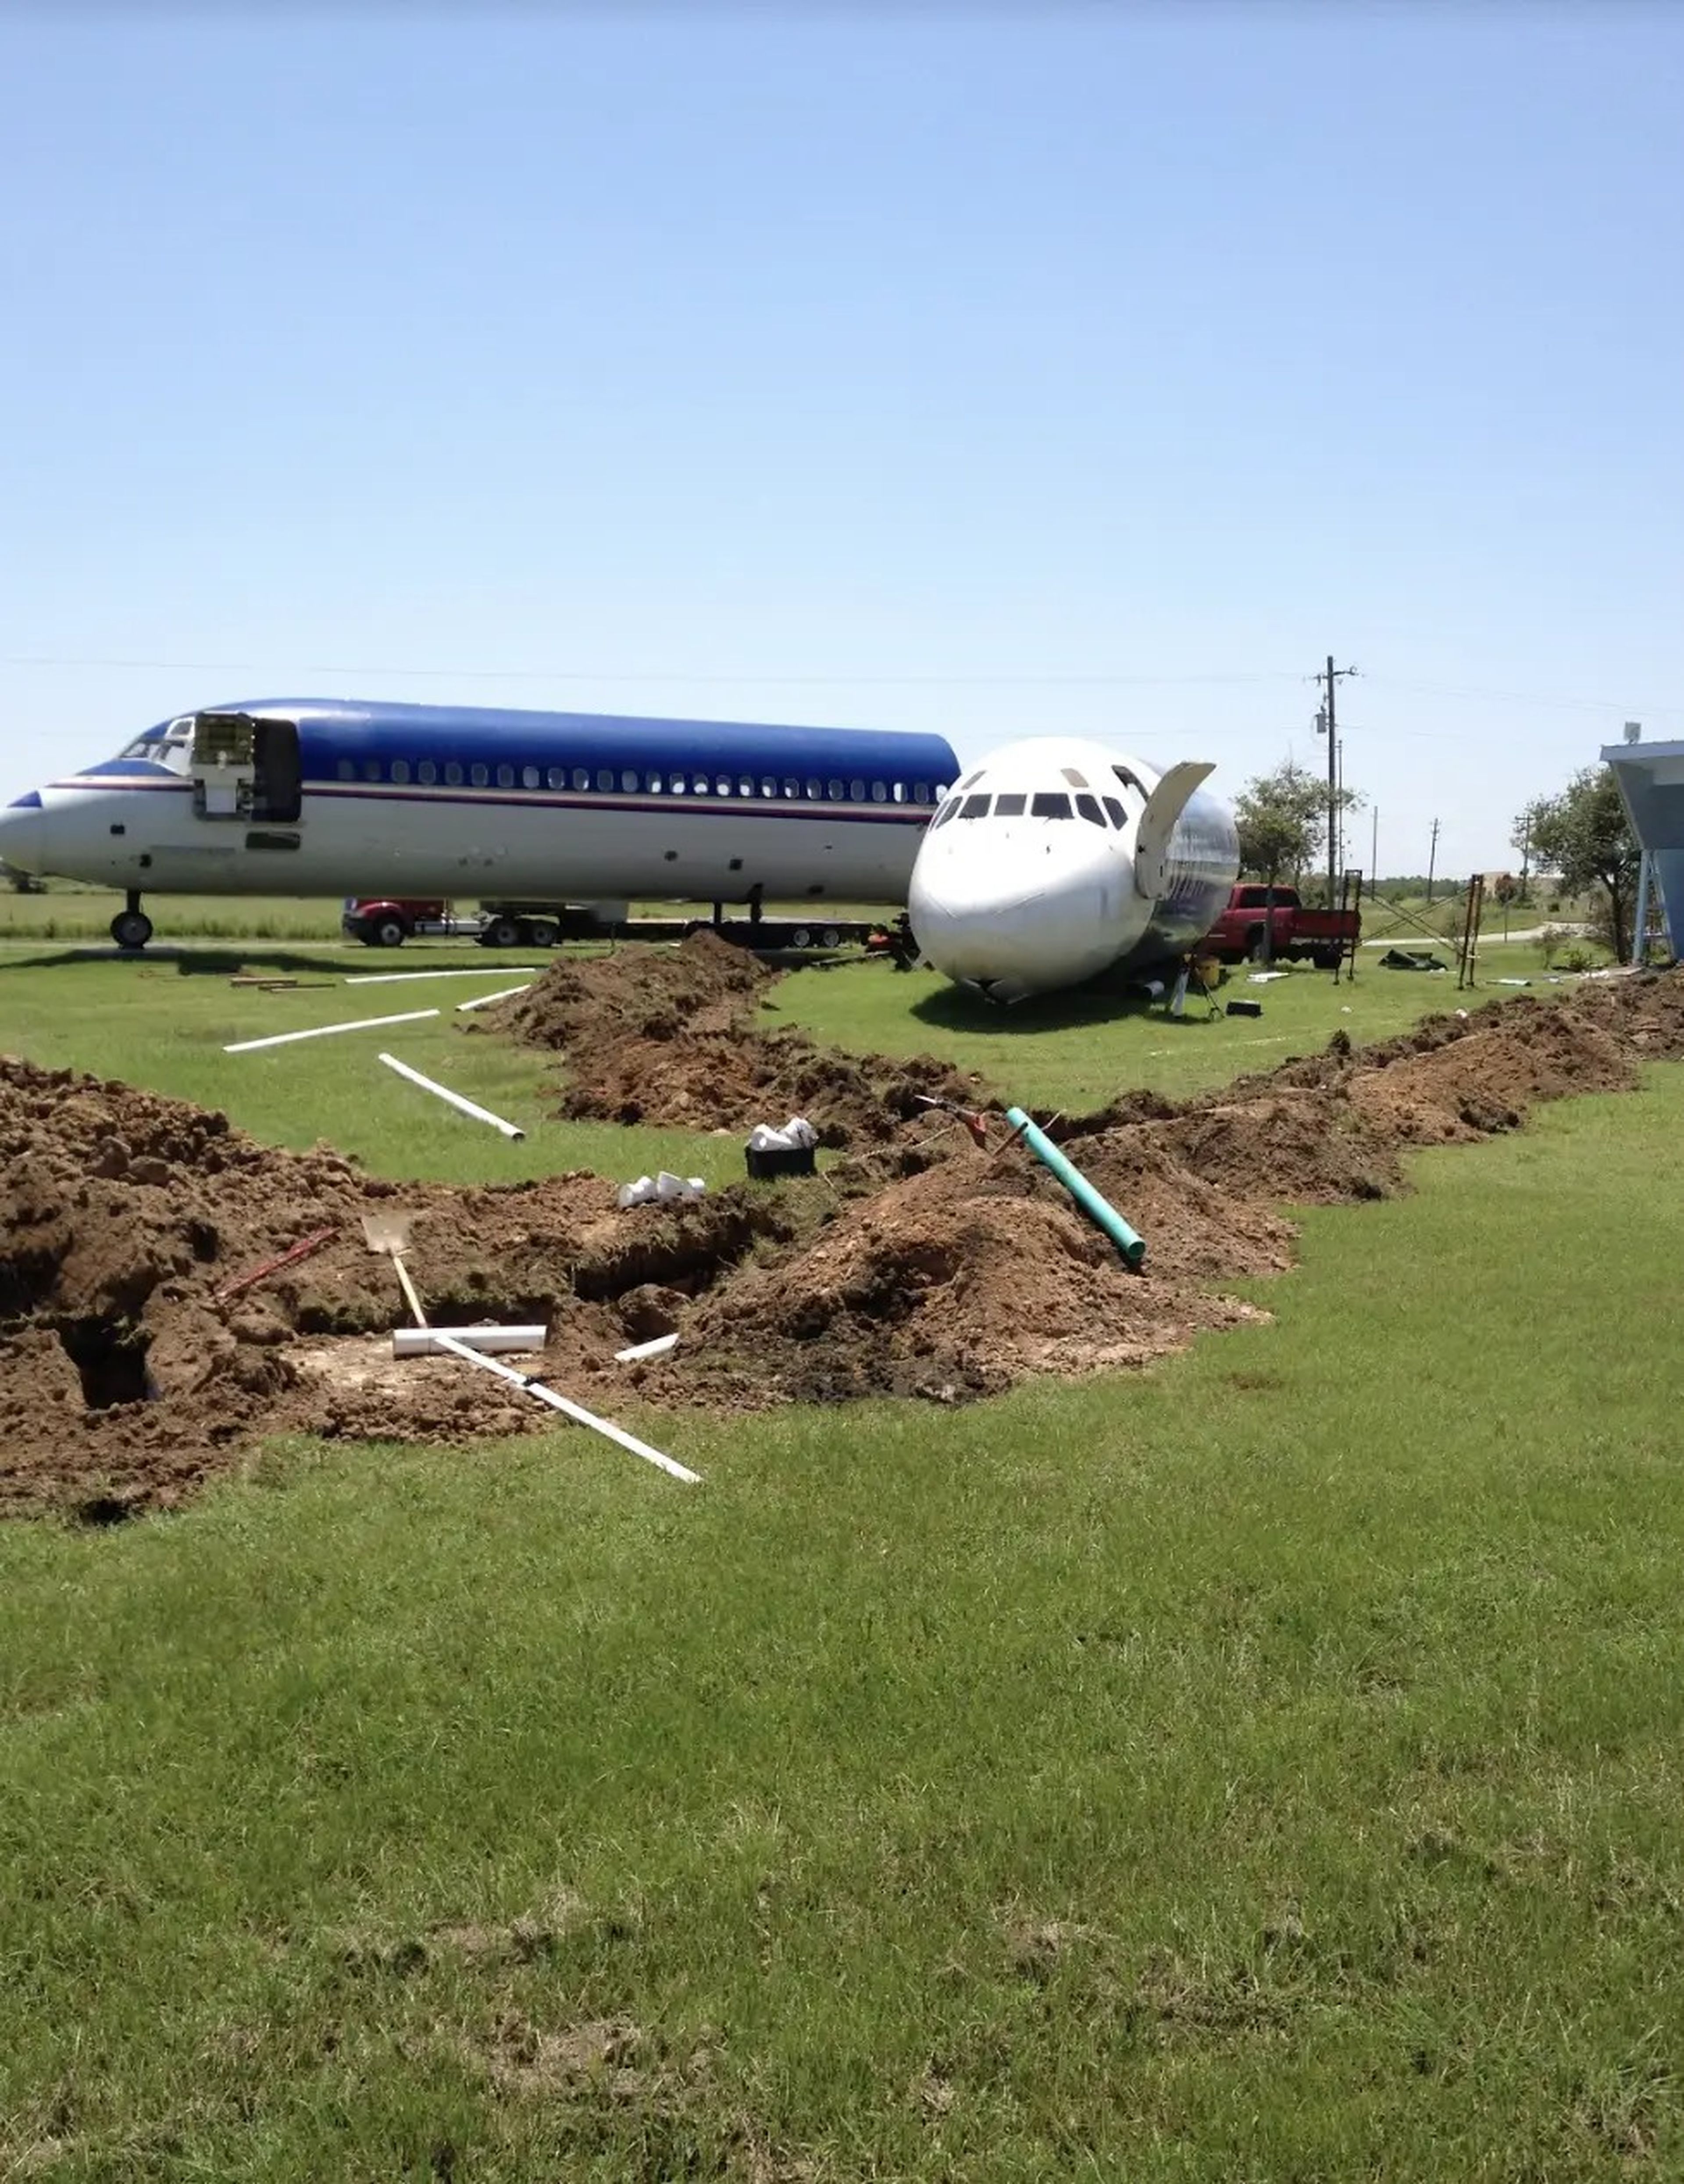 Digging trenches for pipes and wires for the DC-9 Spirit Airlines and MD-80 to have running water and electricity.